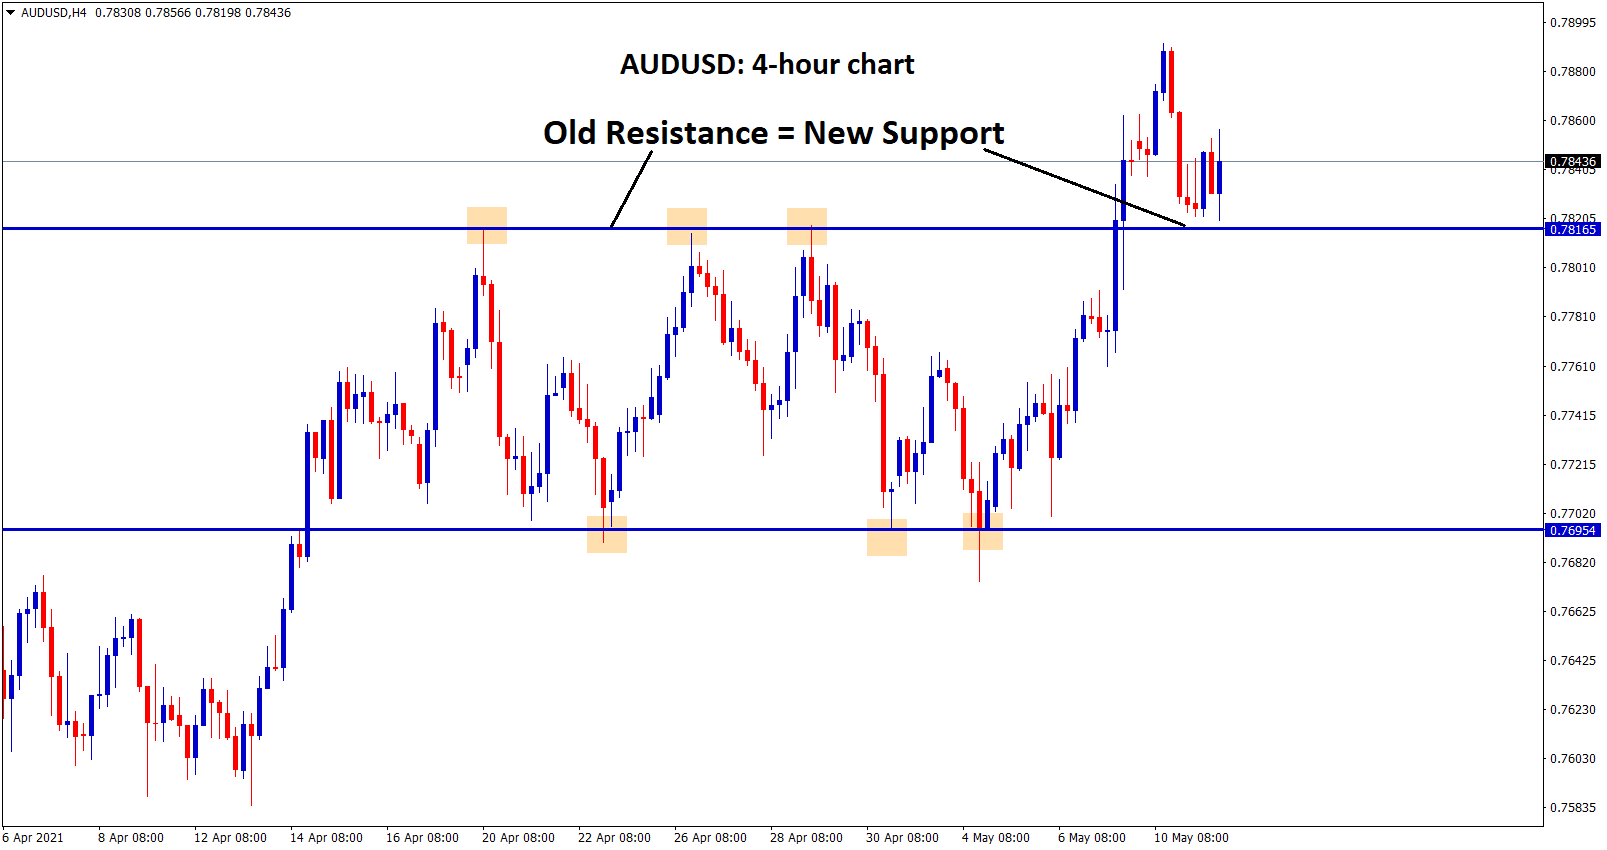 Broken resistance becomes support in AUDUSD 4 hour timeframe chart